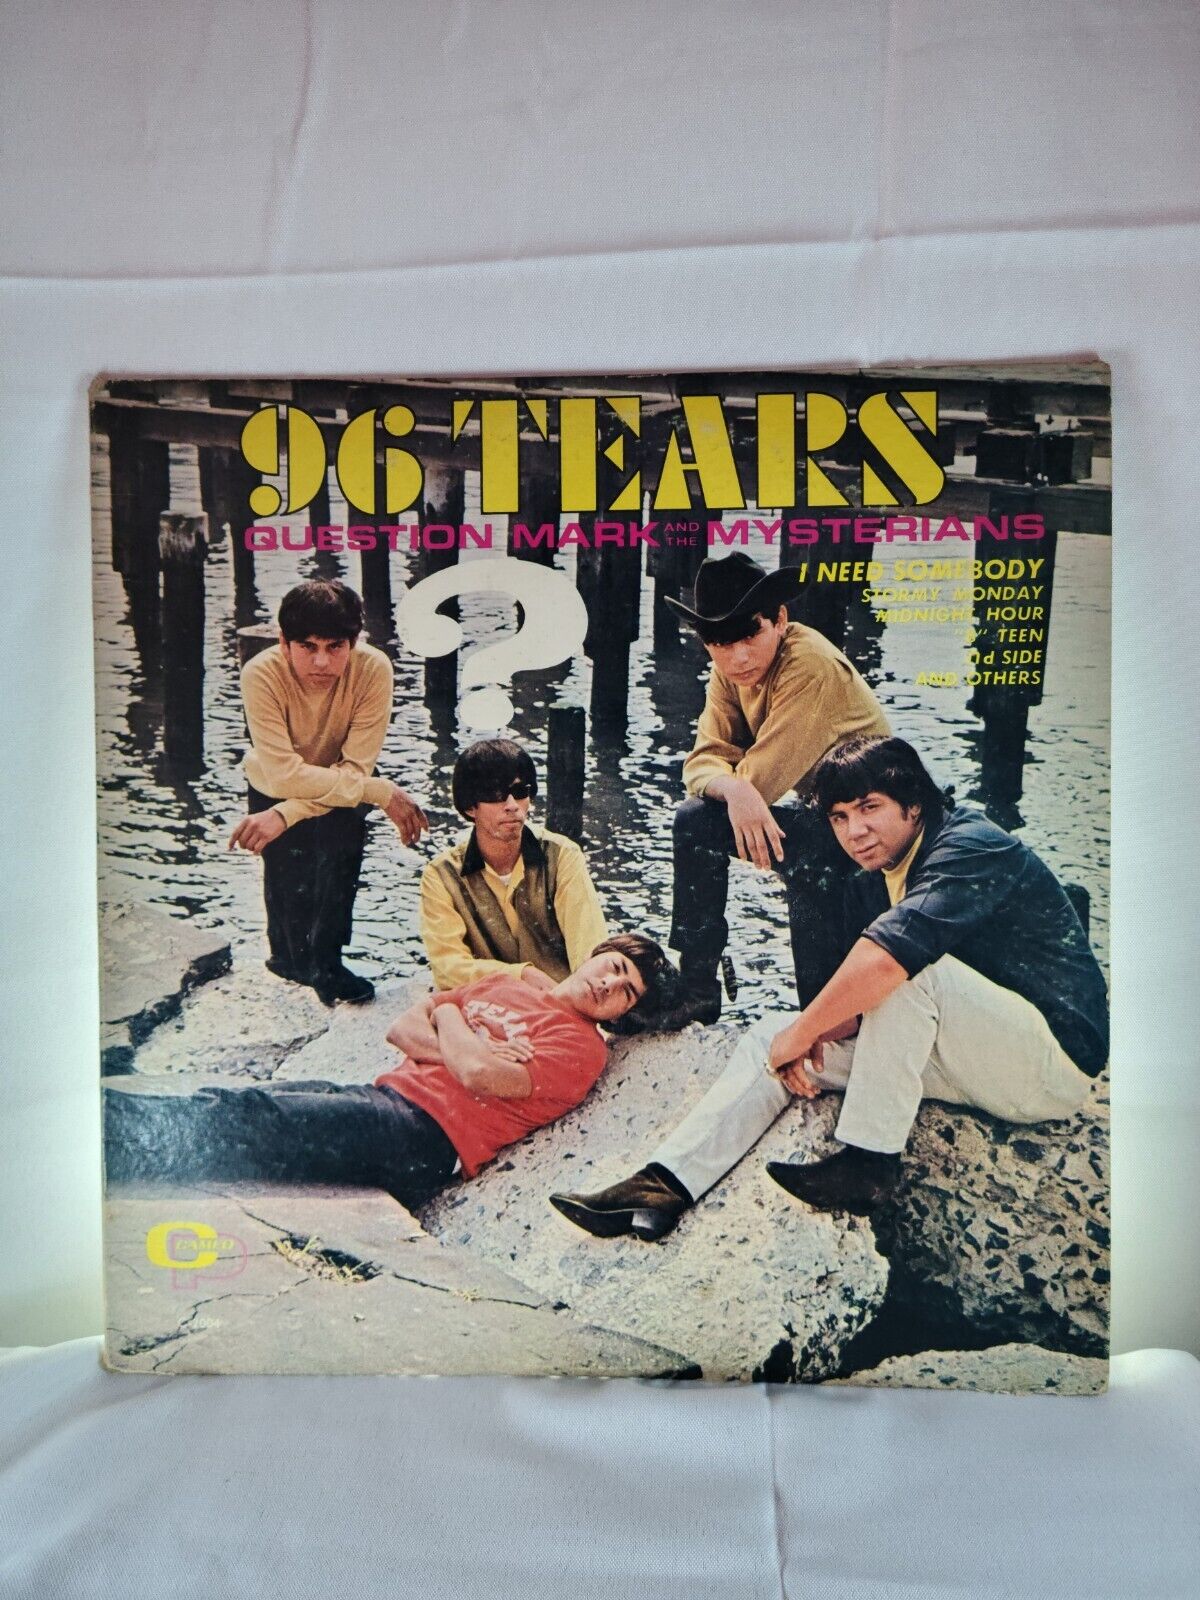 Question Mark And The Mysterians: 96 Tears [LP] 1966 Mono Cameo Records Album